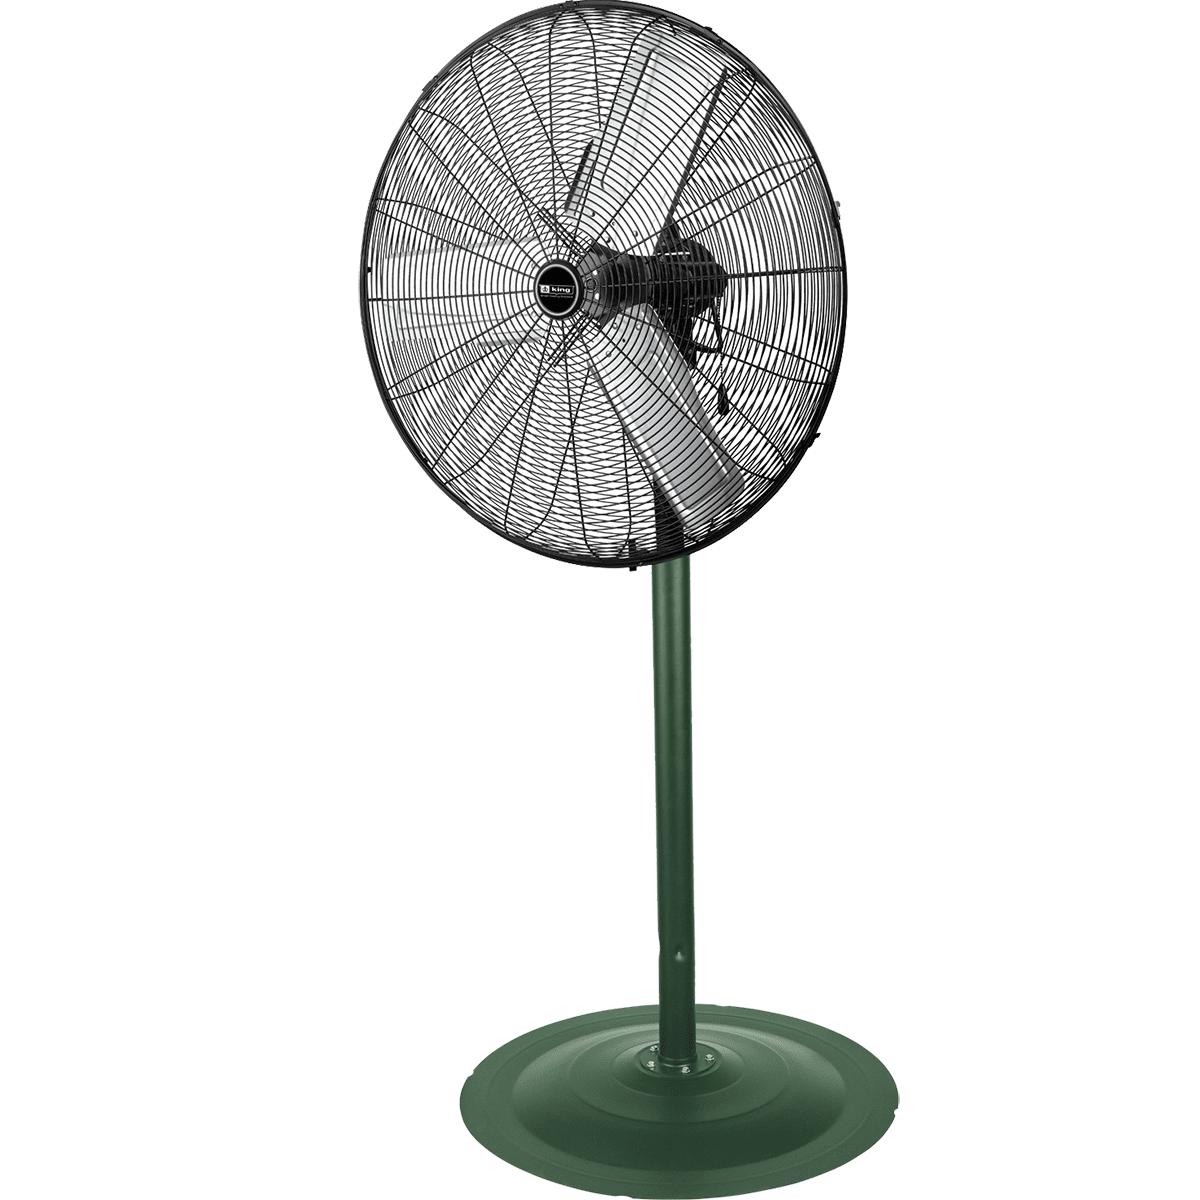 King Electric Outdoor Rated Oscillating Pedestal Fan - 24-inch